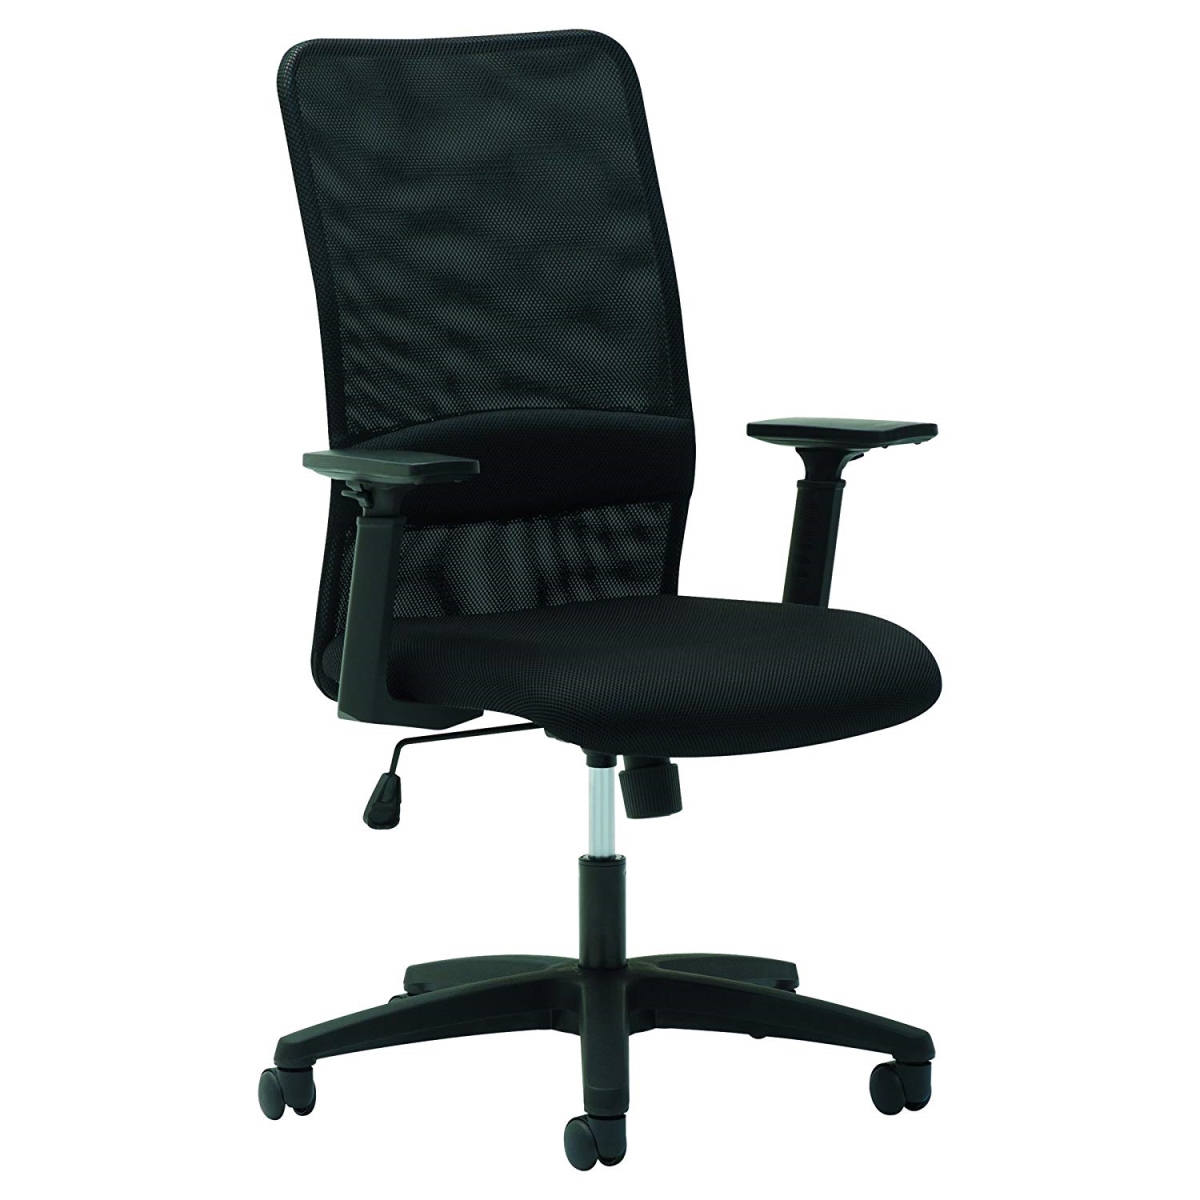 Sm4117 Mesh High-back Chair With Height Adjustable T-bar Arms, Black